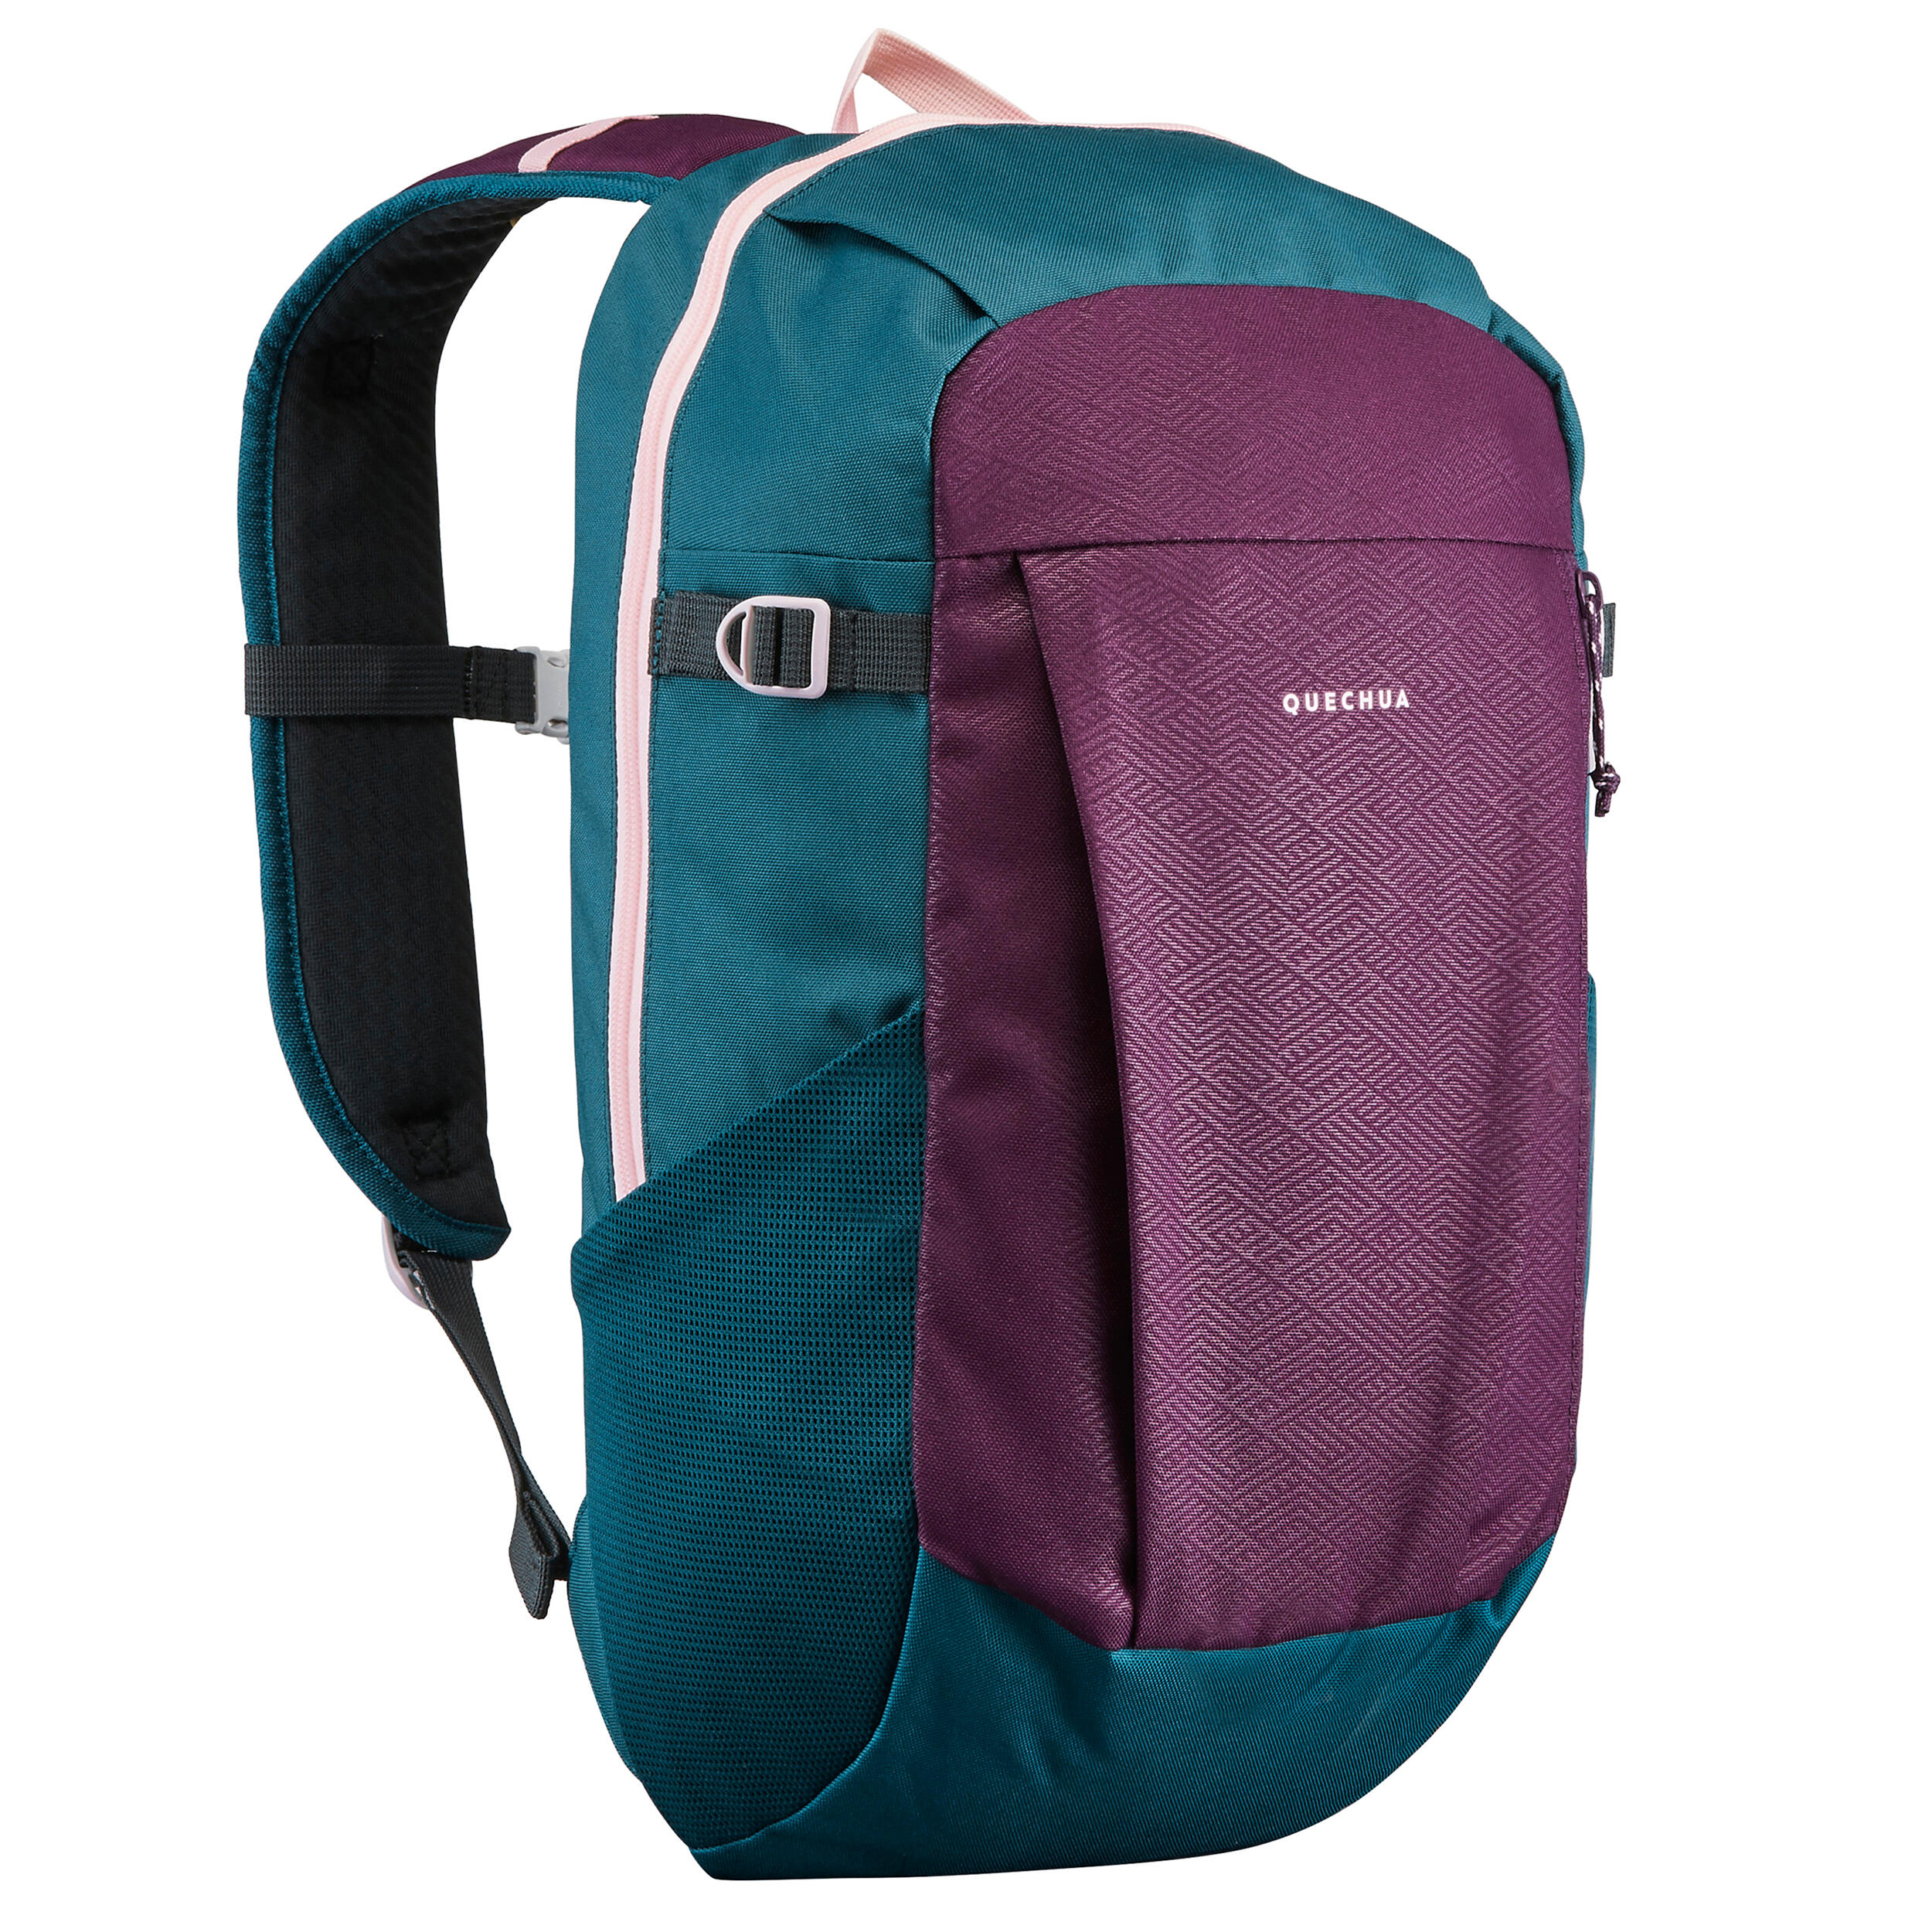 QUECHUA Hiking Backpack 20 L - NH Arpenaz 100